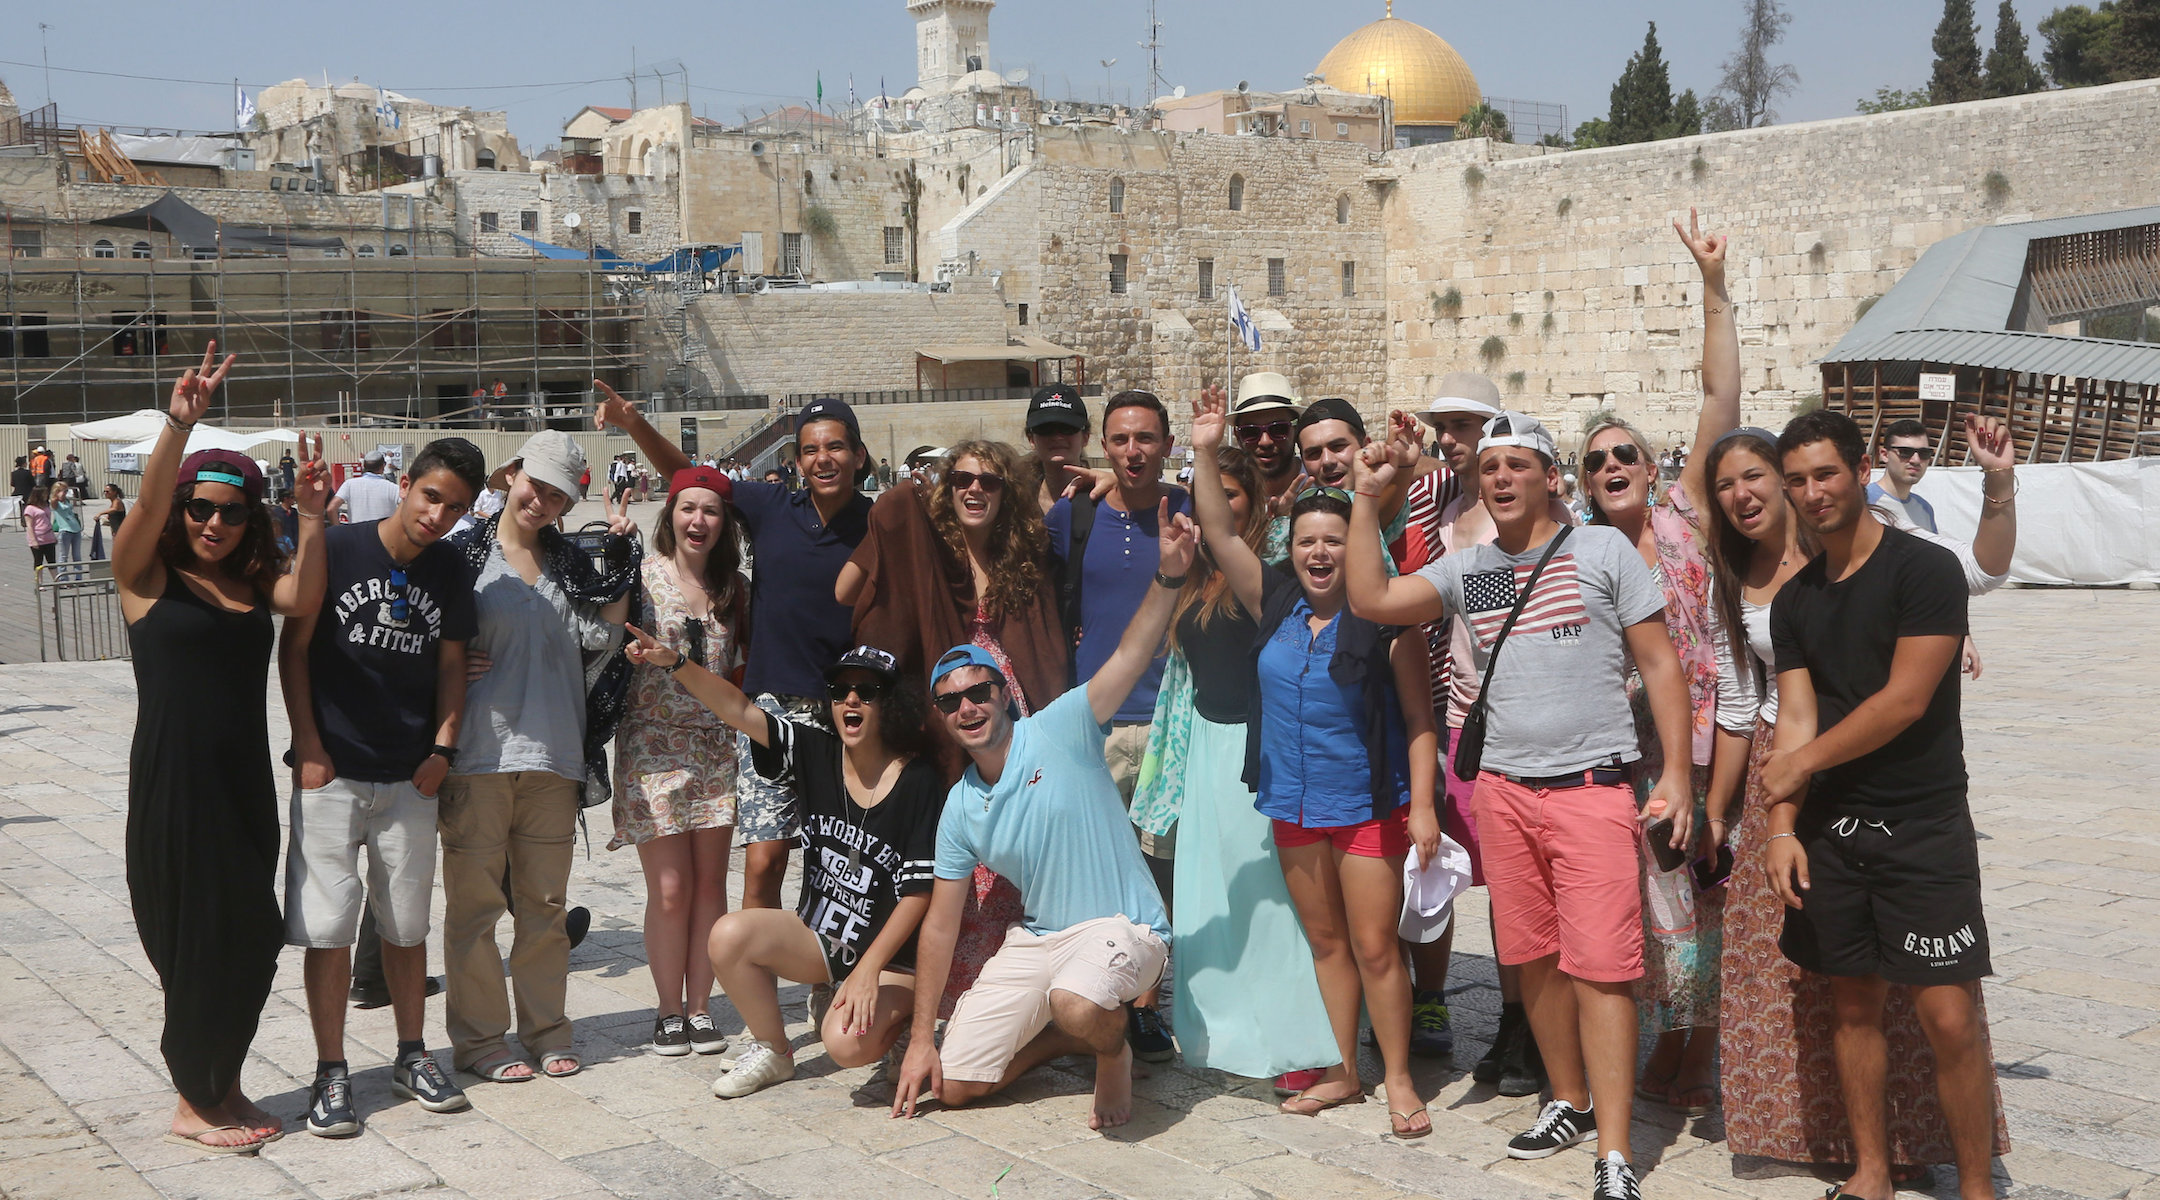 Birthright Israel participants visit the Western Wall in the Old City of Jerusalem, Aug. 18, 2014. (Flash90)